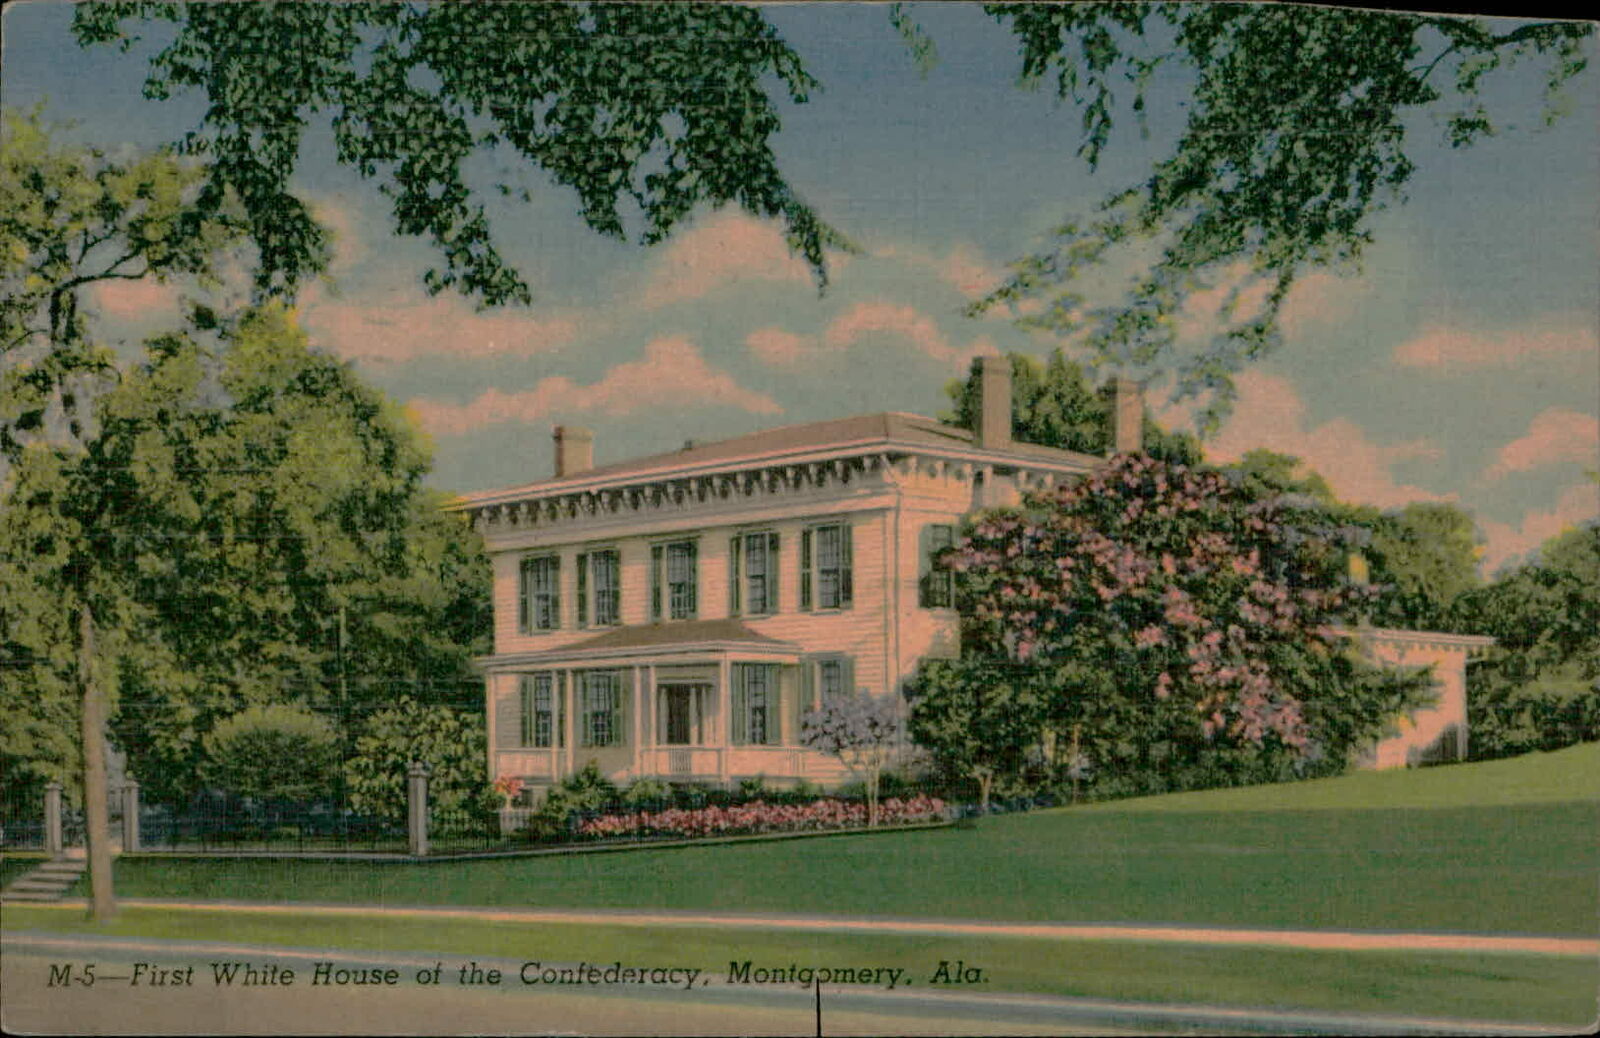 Postcard: M-5 First White House of the Confederacy, Montgomery, Ala.